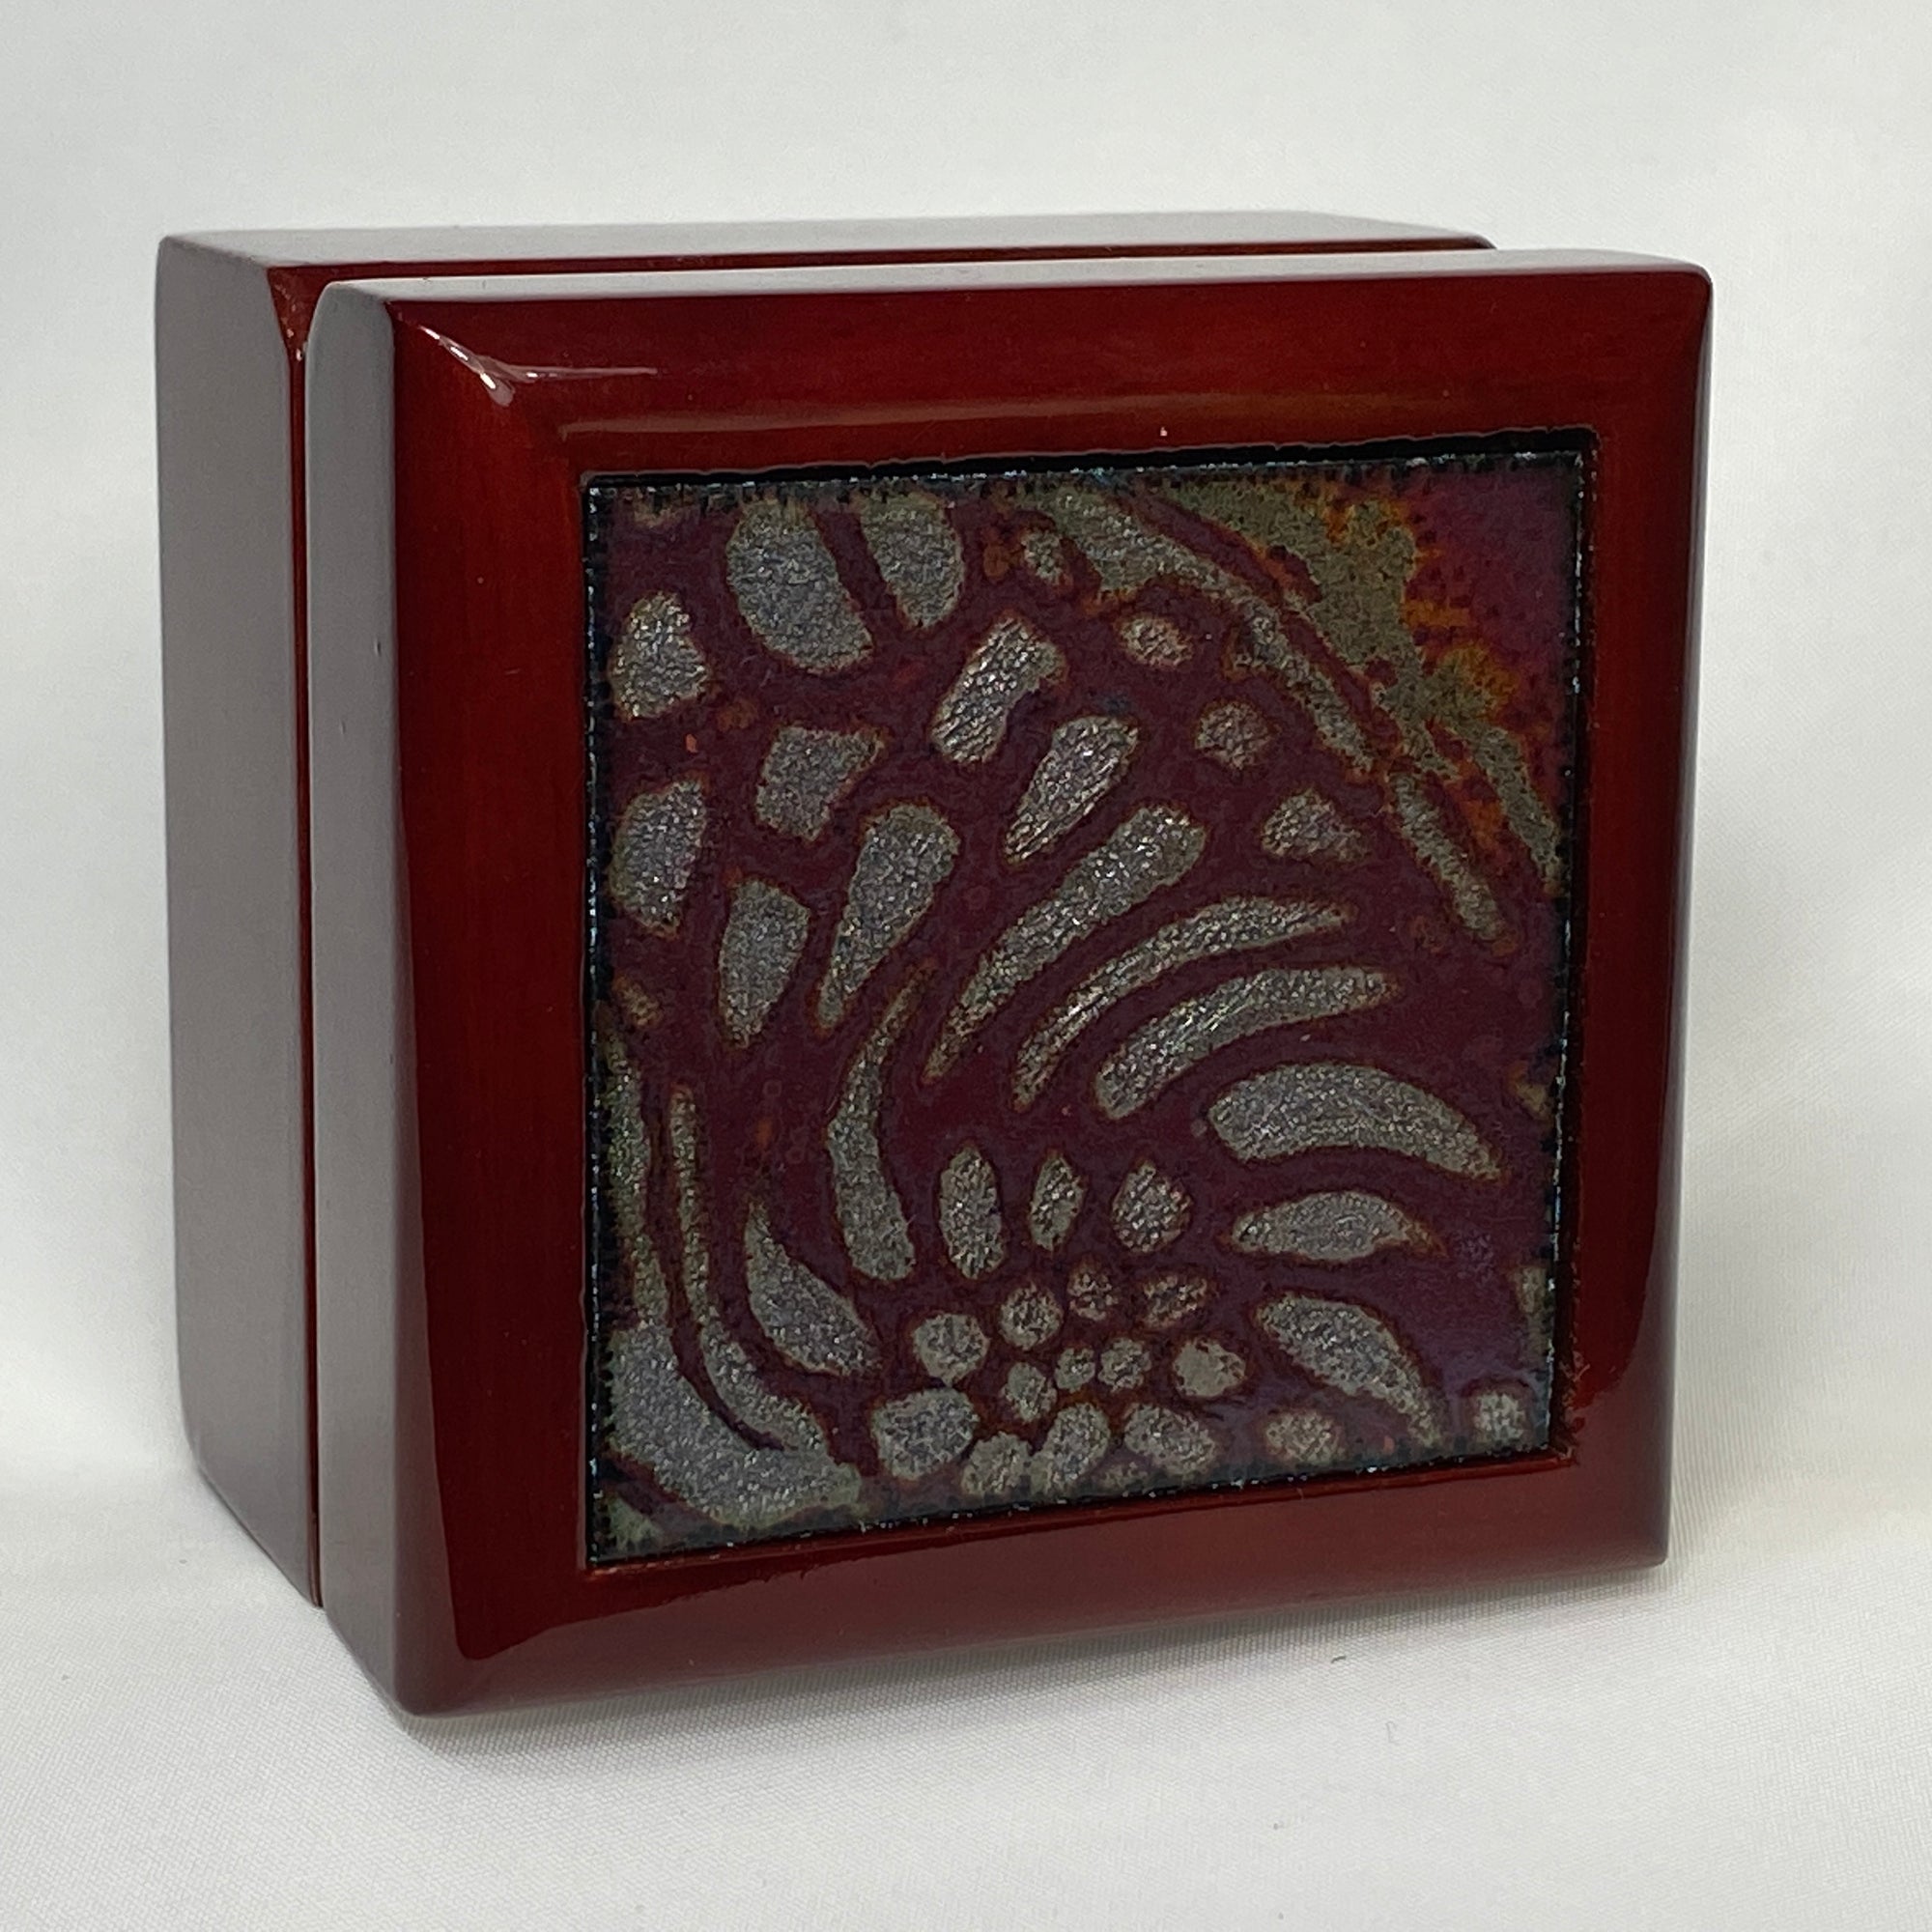 Camille Patton Opalescent Flower Ring Box Vitreous Enamel Inlay in lid of wooden box